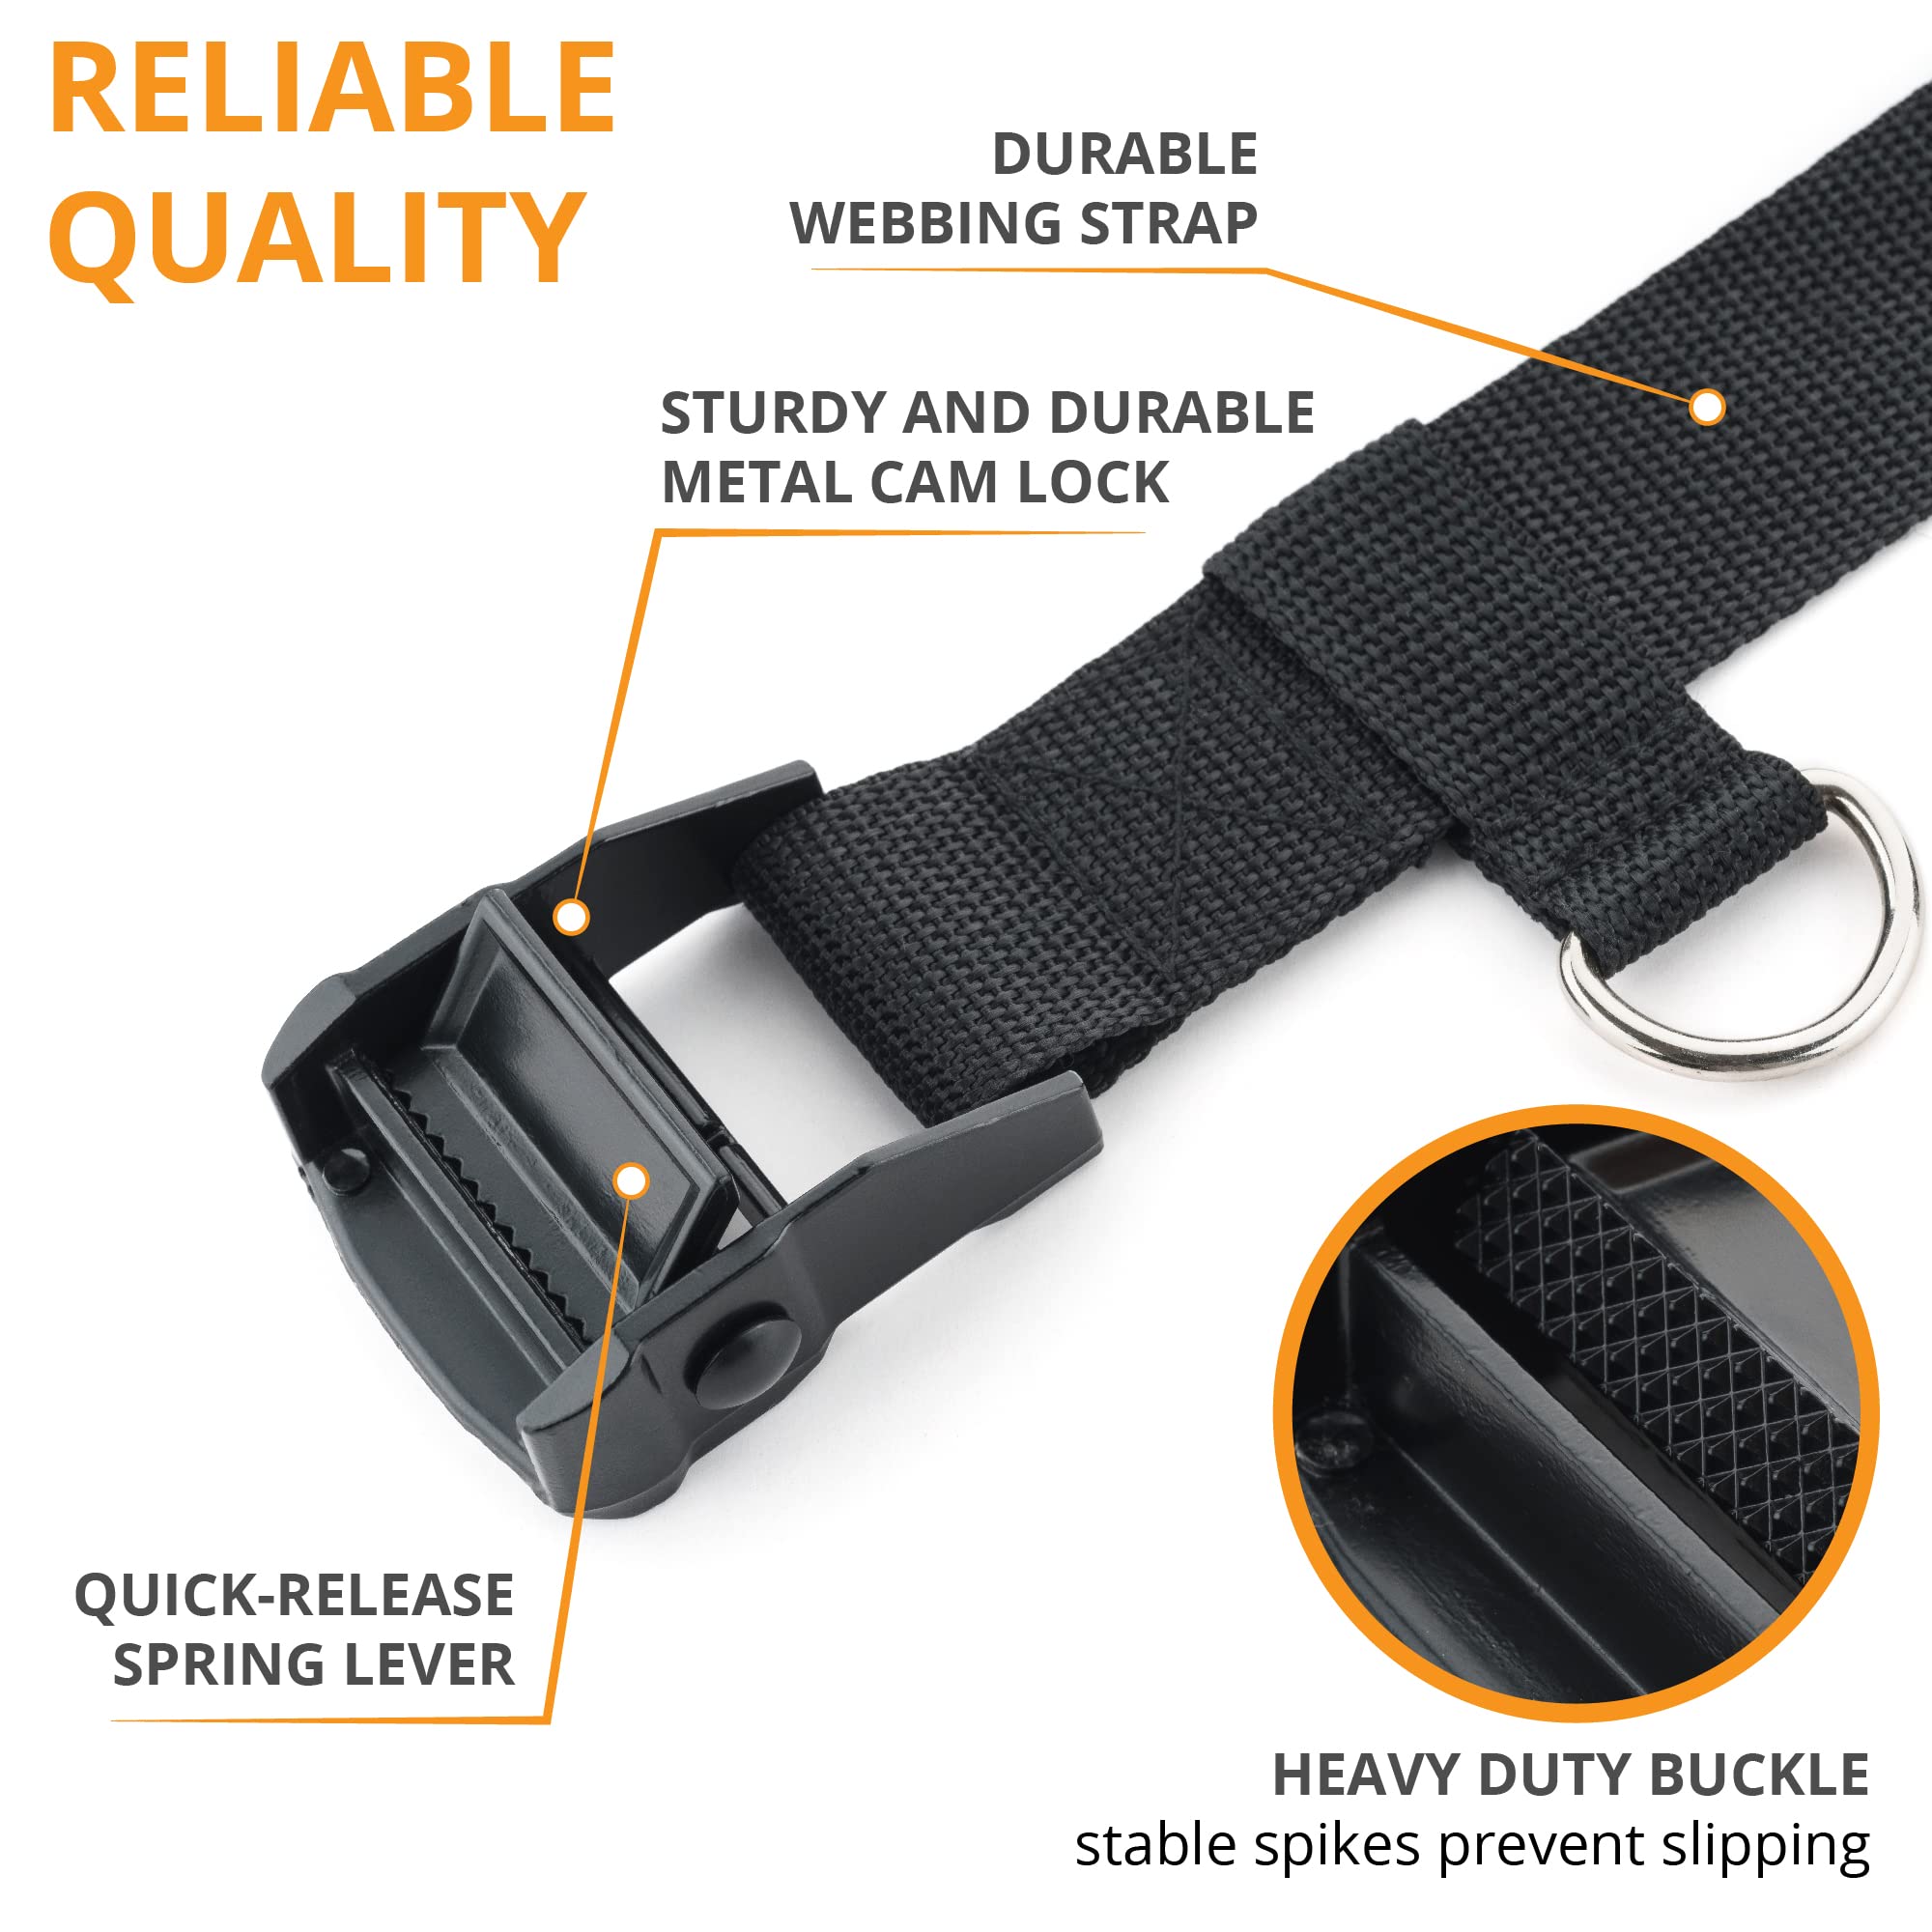 V VOLKGO Сar Sеat Travel Belt - Easy Carry & Saving Money - Car Seat Travel Strap to Convert Your Car Seat and Carry-on Luggage into an Airport Car Seat Stroller